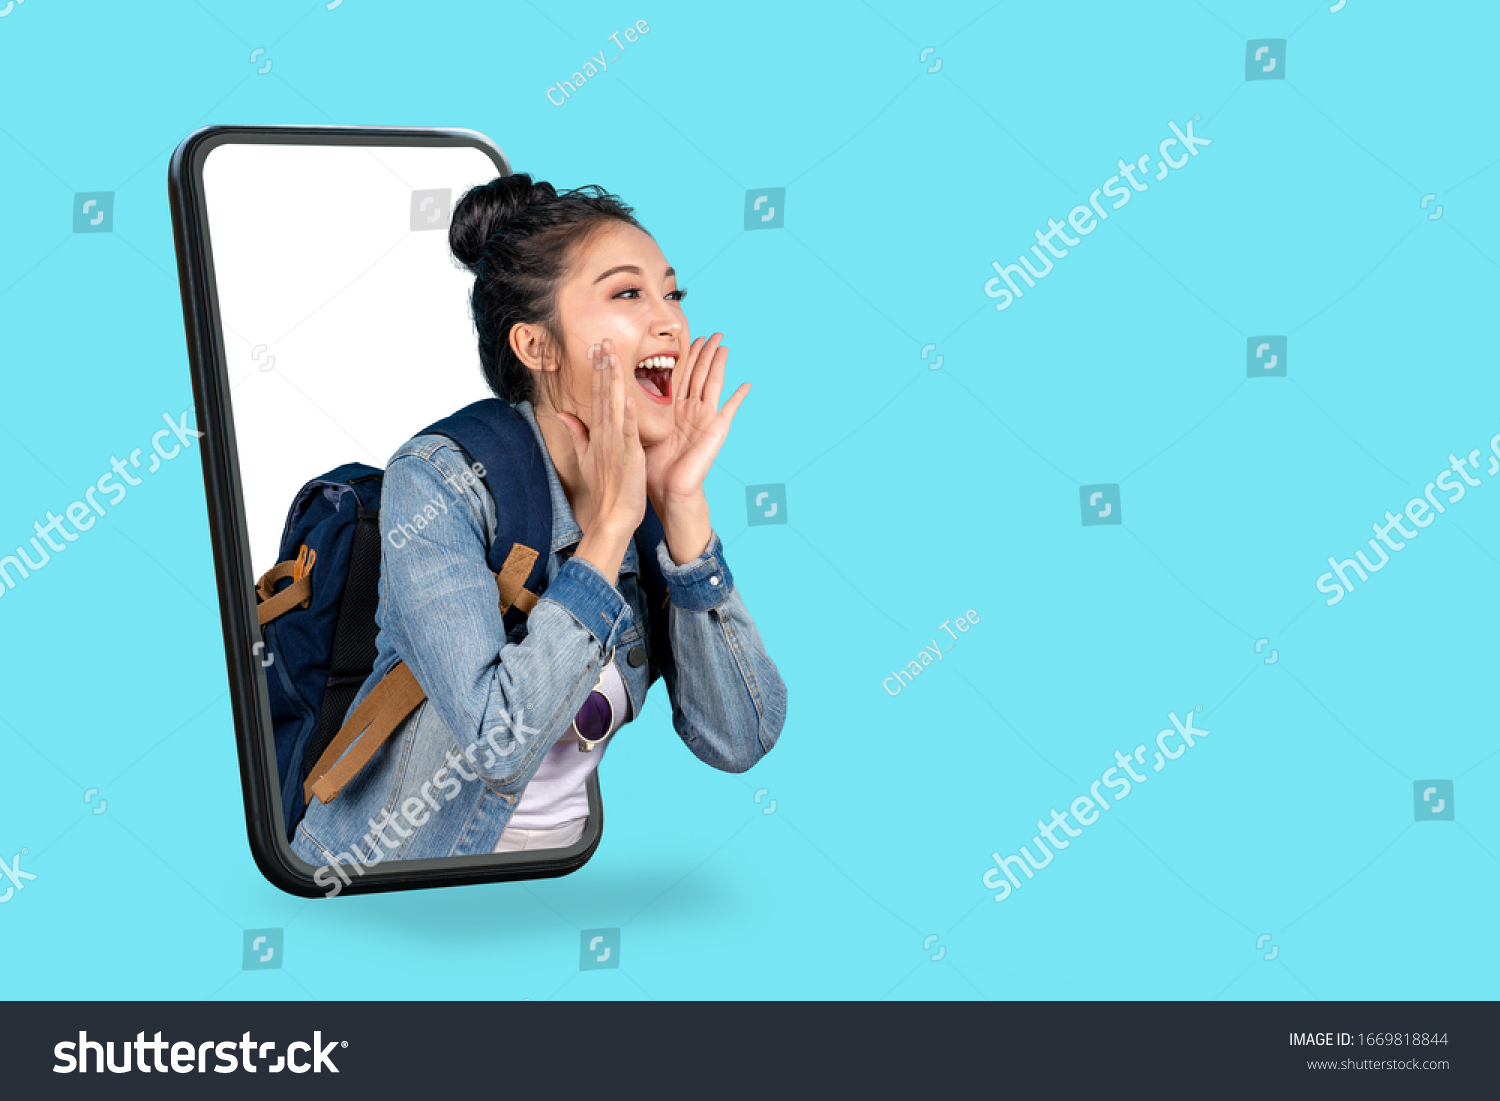 Smartphone pop up for advertising.Asian woman travel backpacker shouting open mouth through from screen mobile.Girl looking to aside copy space for present promotions.Digital marketing online cencept. #1669818844